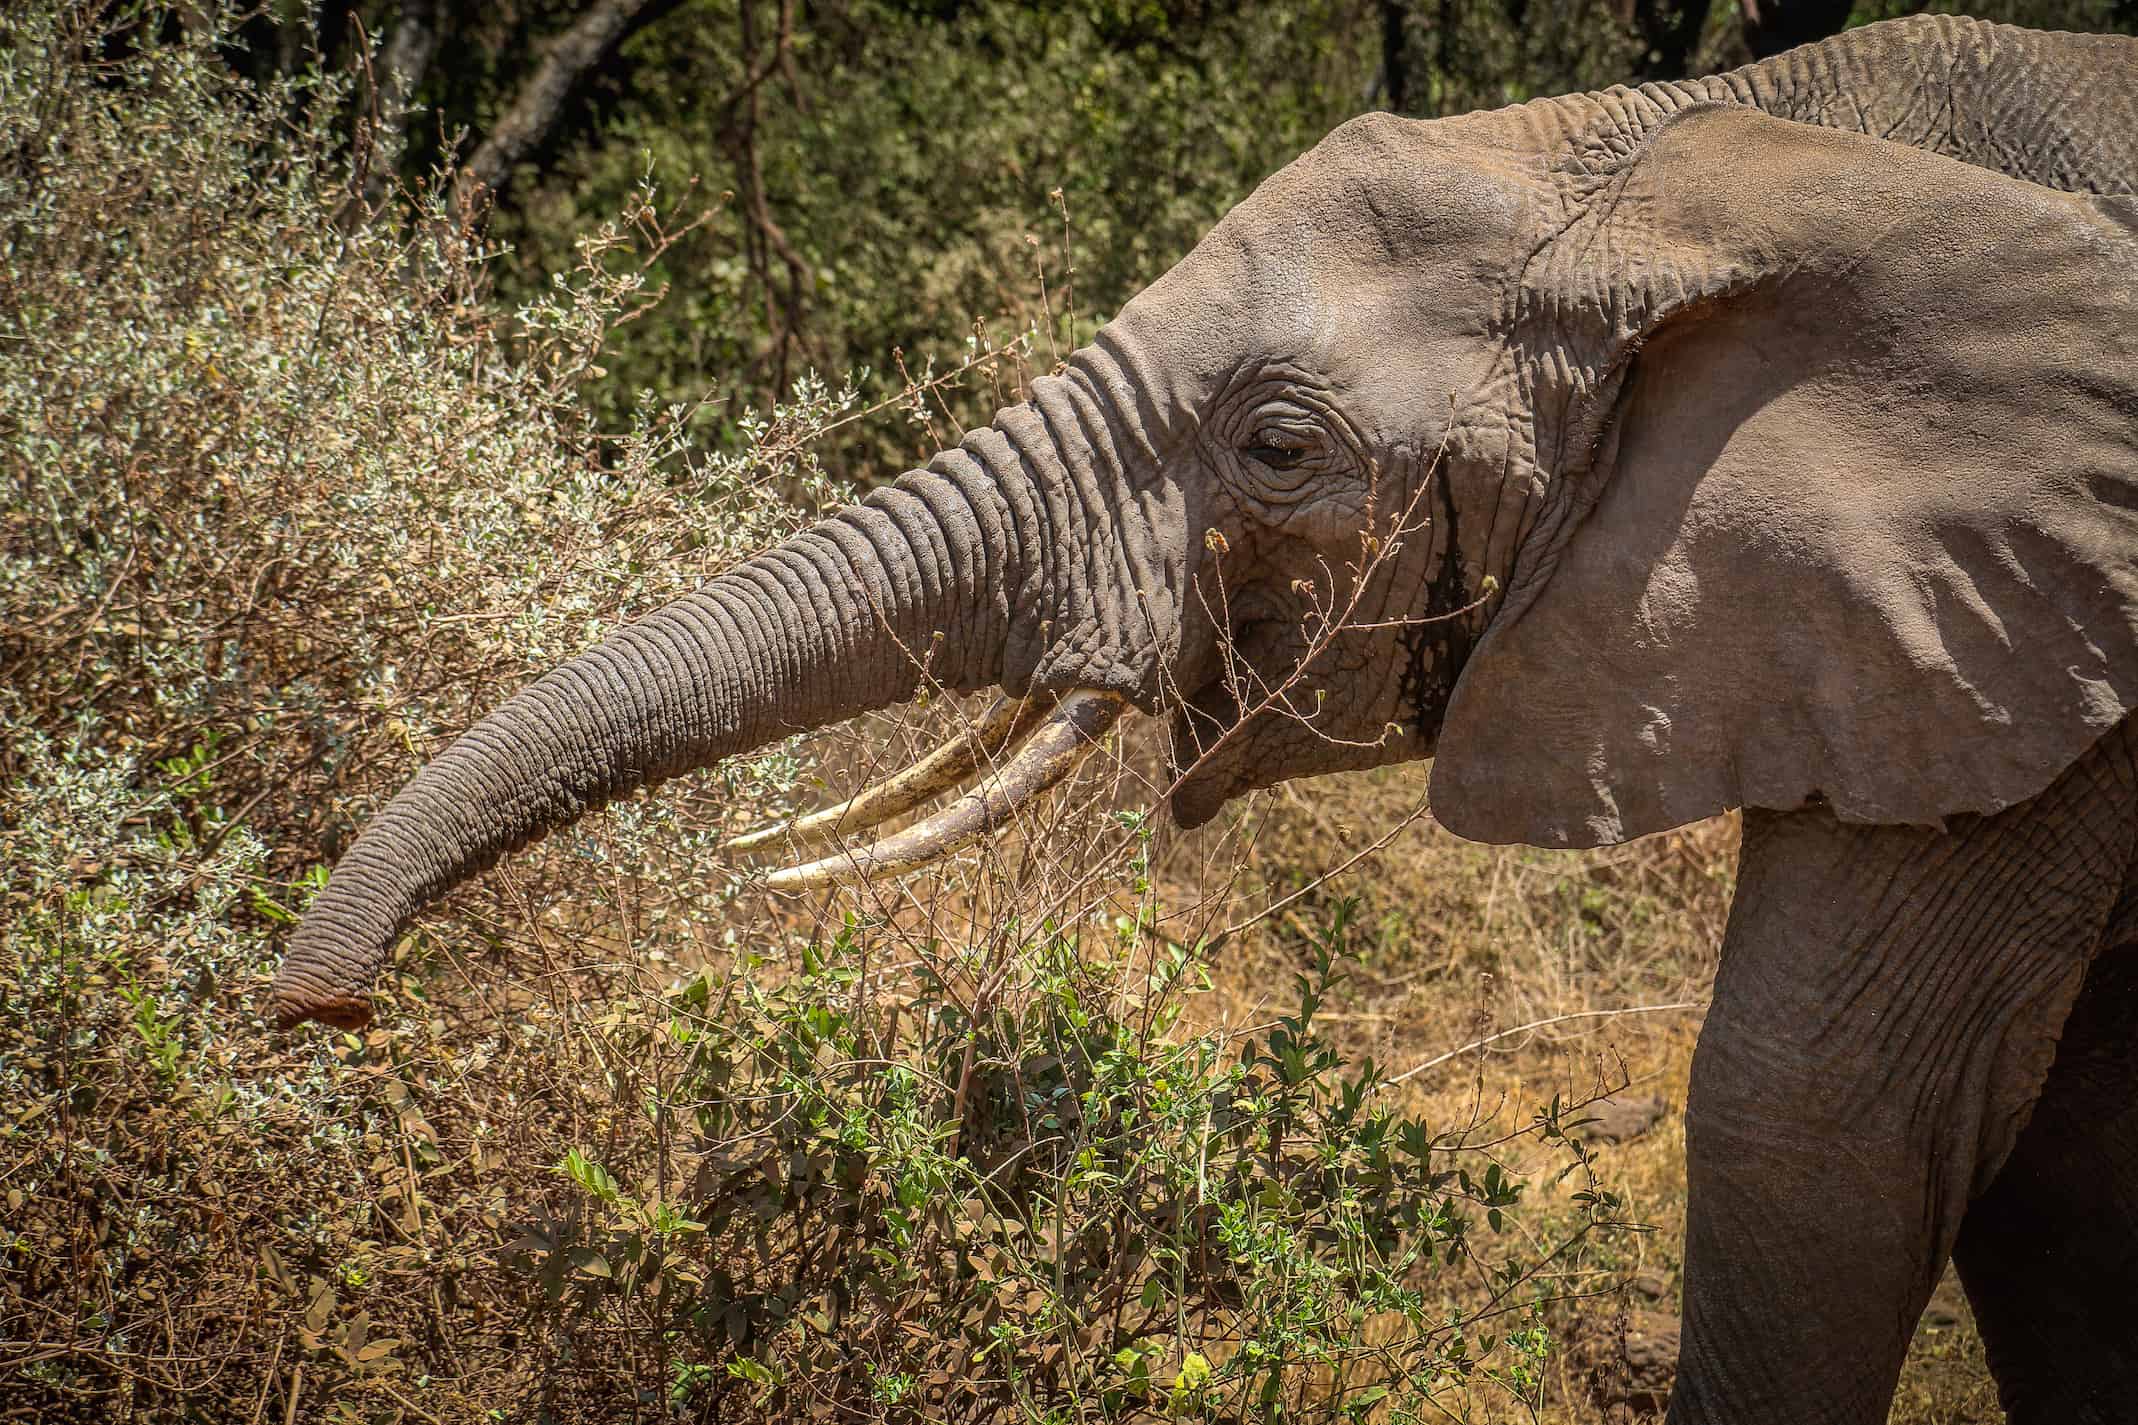 Fun Facts about Elephants: African Elephant Trunk